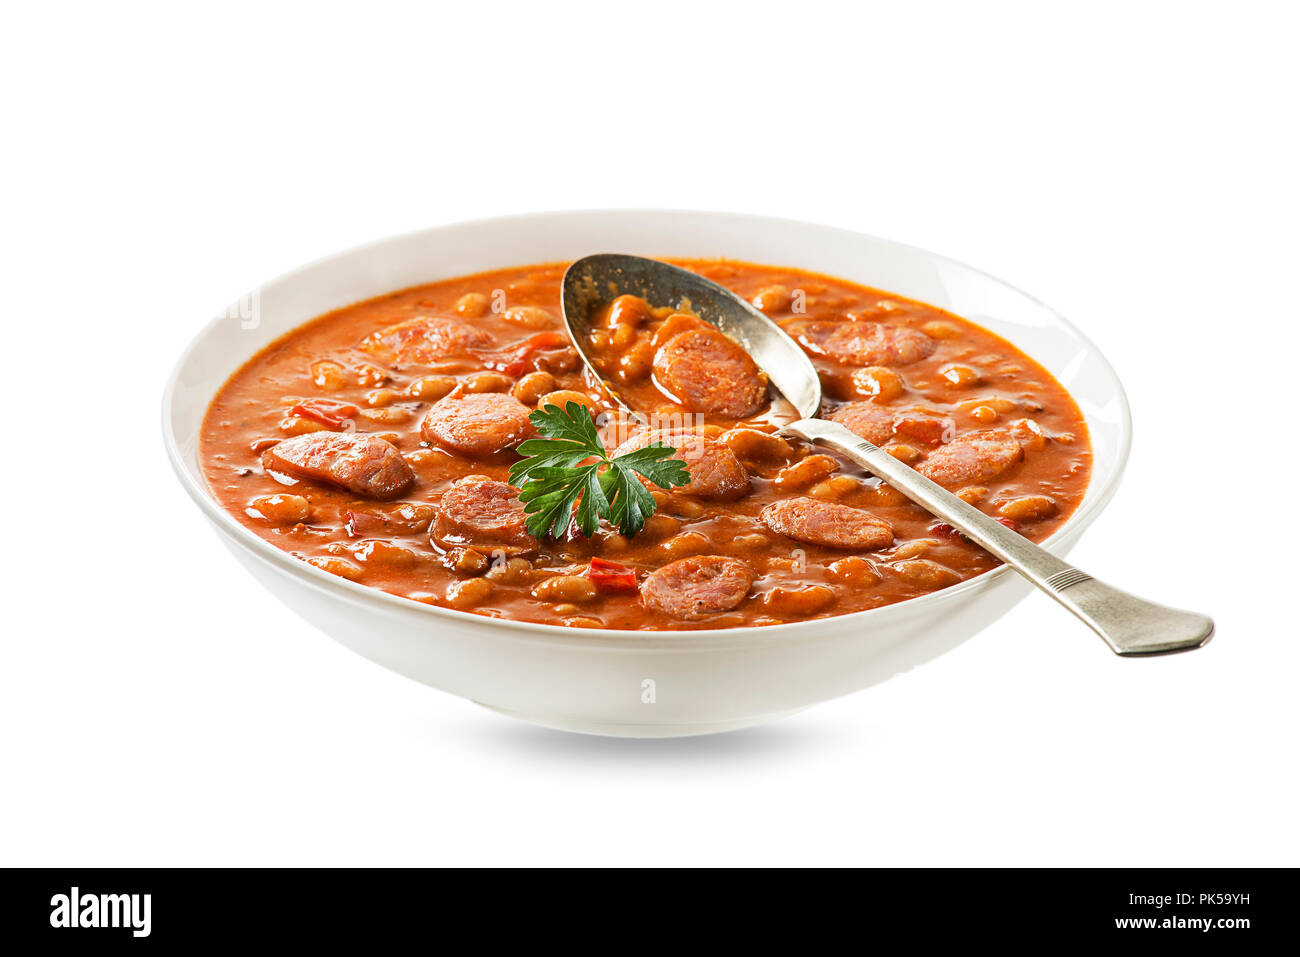 Baked beans stew with tomato sauce and sausage with herbs isolated on white Stock Photo